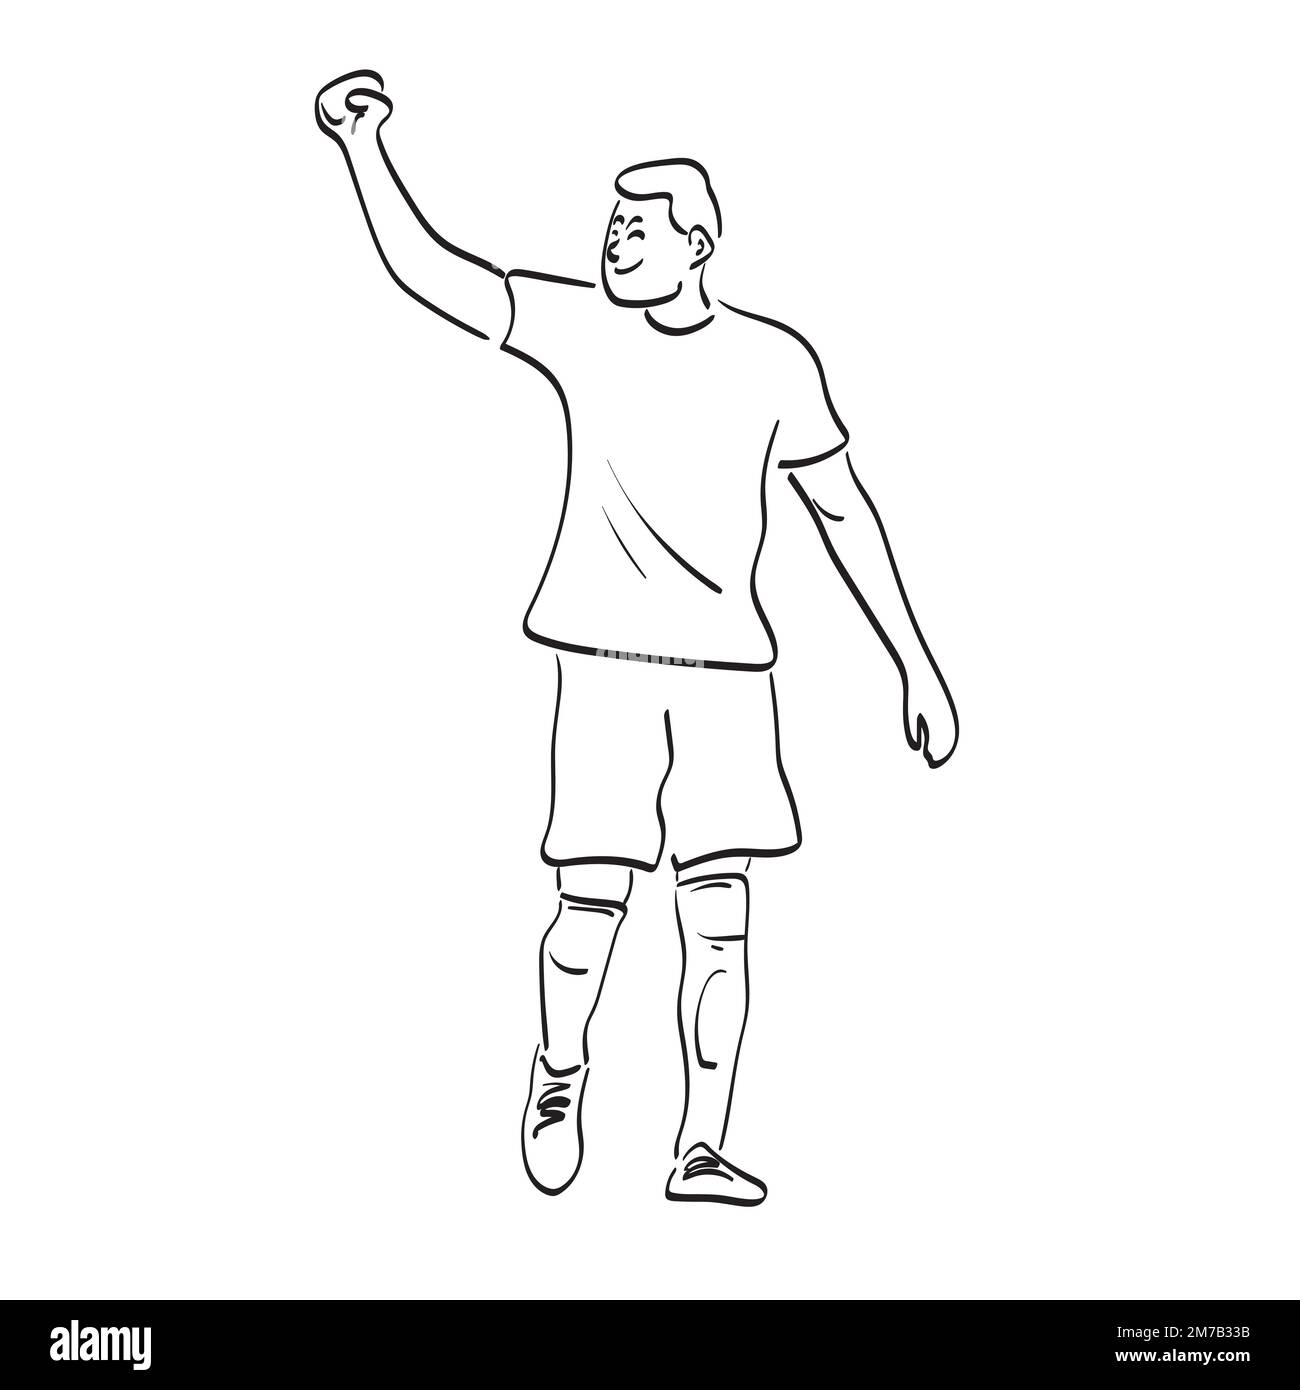 line art soccer player celebrating his goal with fist illustration vector hand drawn isolated on white background Stock Vector